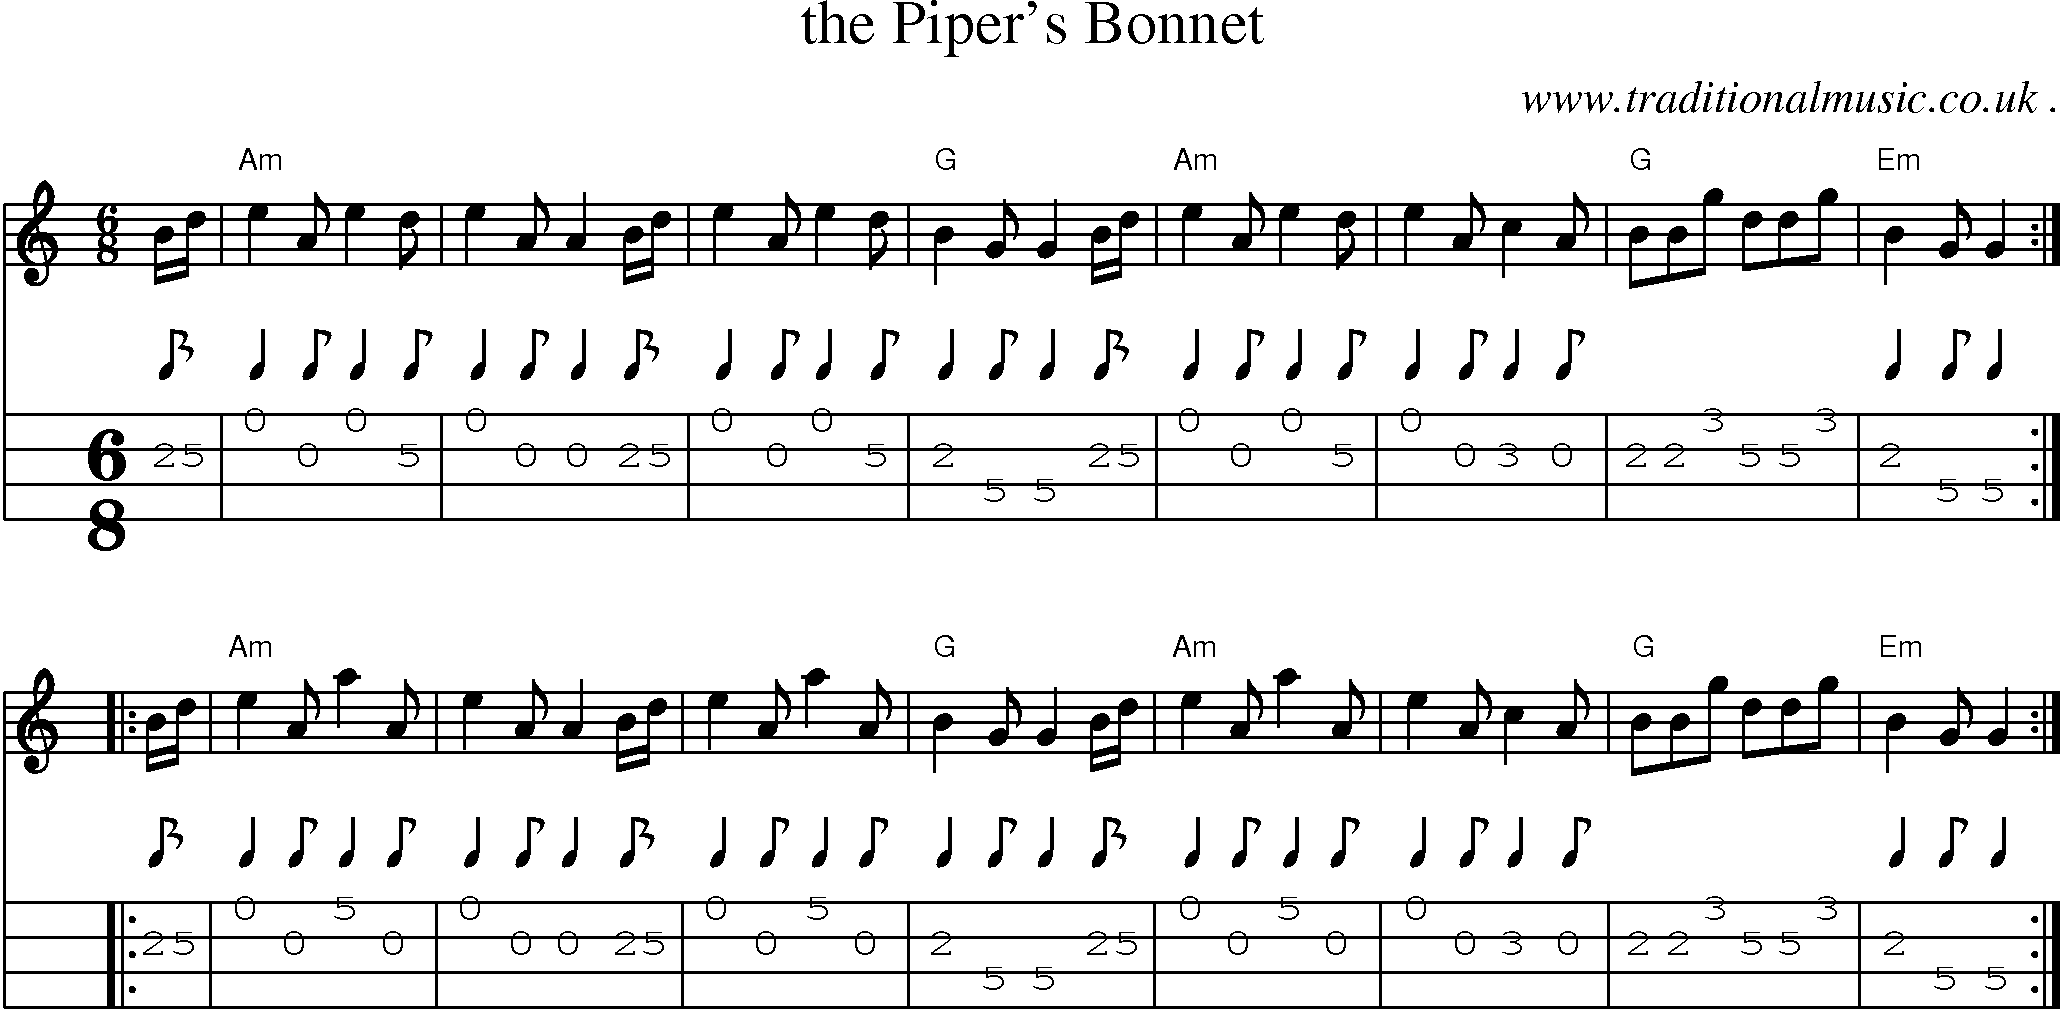 Sheet-music  score, Chords and Mandolin Tabs for The Pipers Bonnet